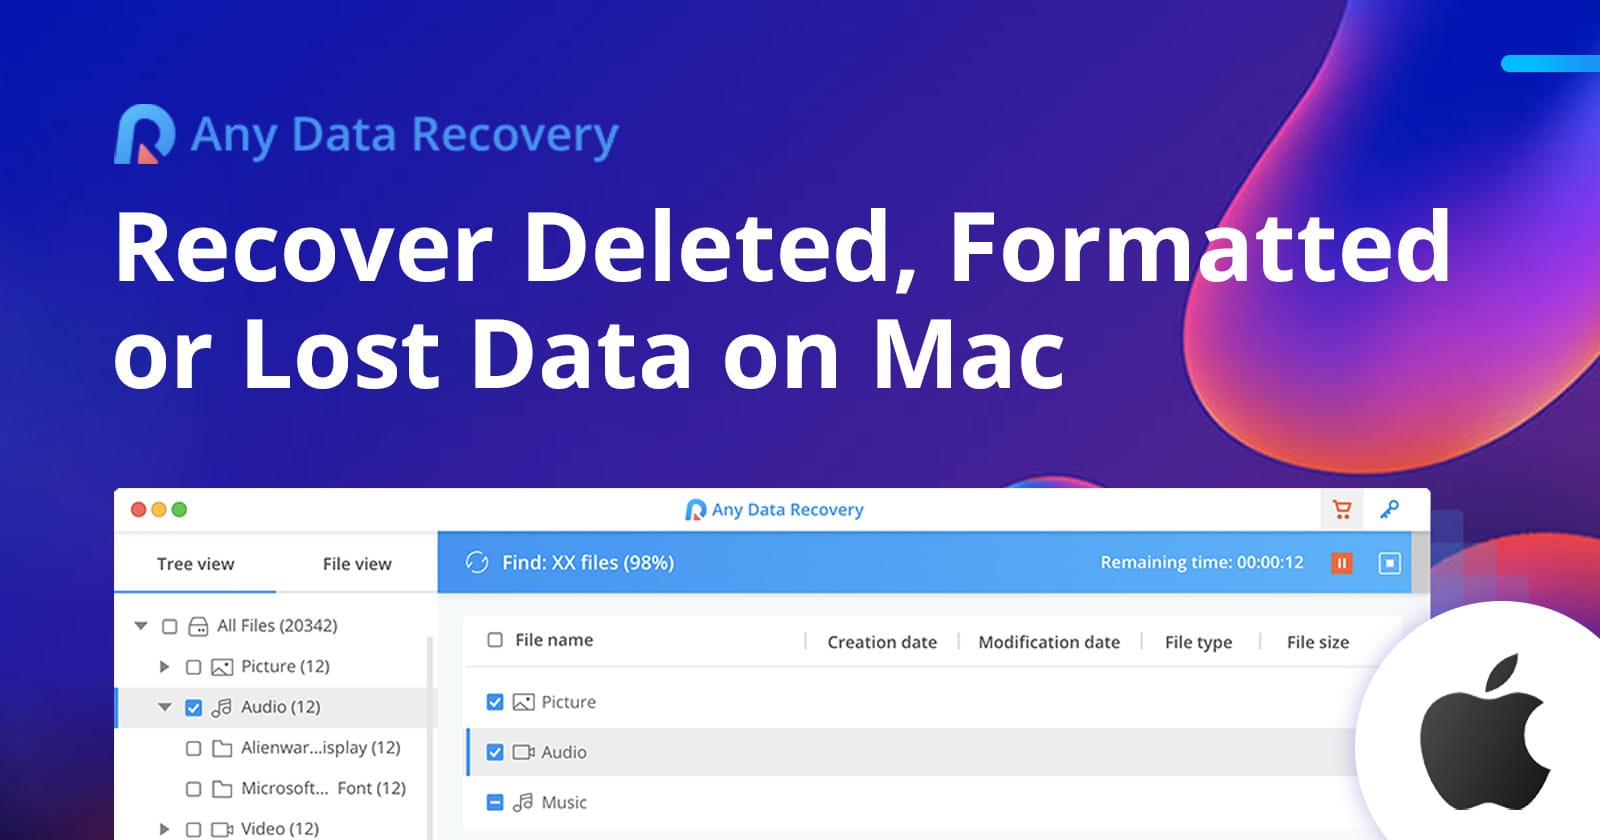 Any Data Recovery for Mac takes a deep dive into damaged or corrupted drives to recover lost files and data.